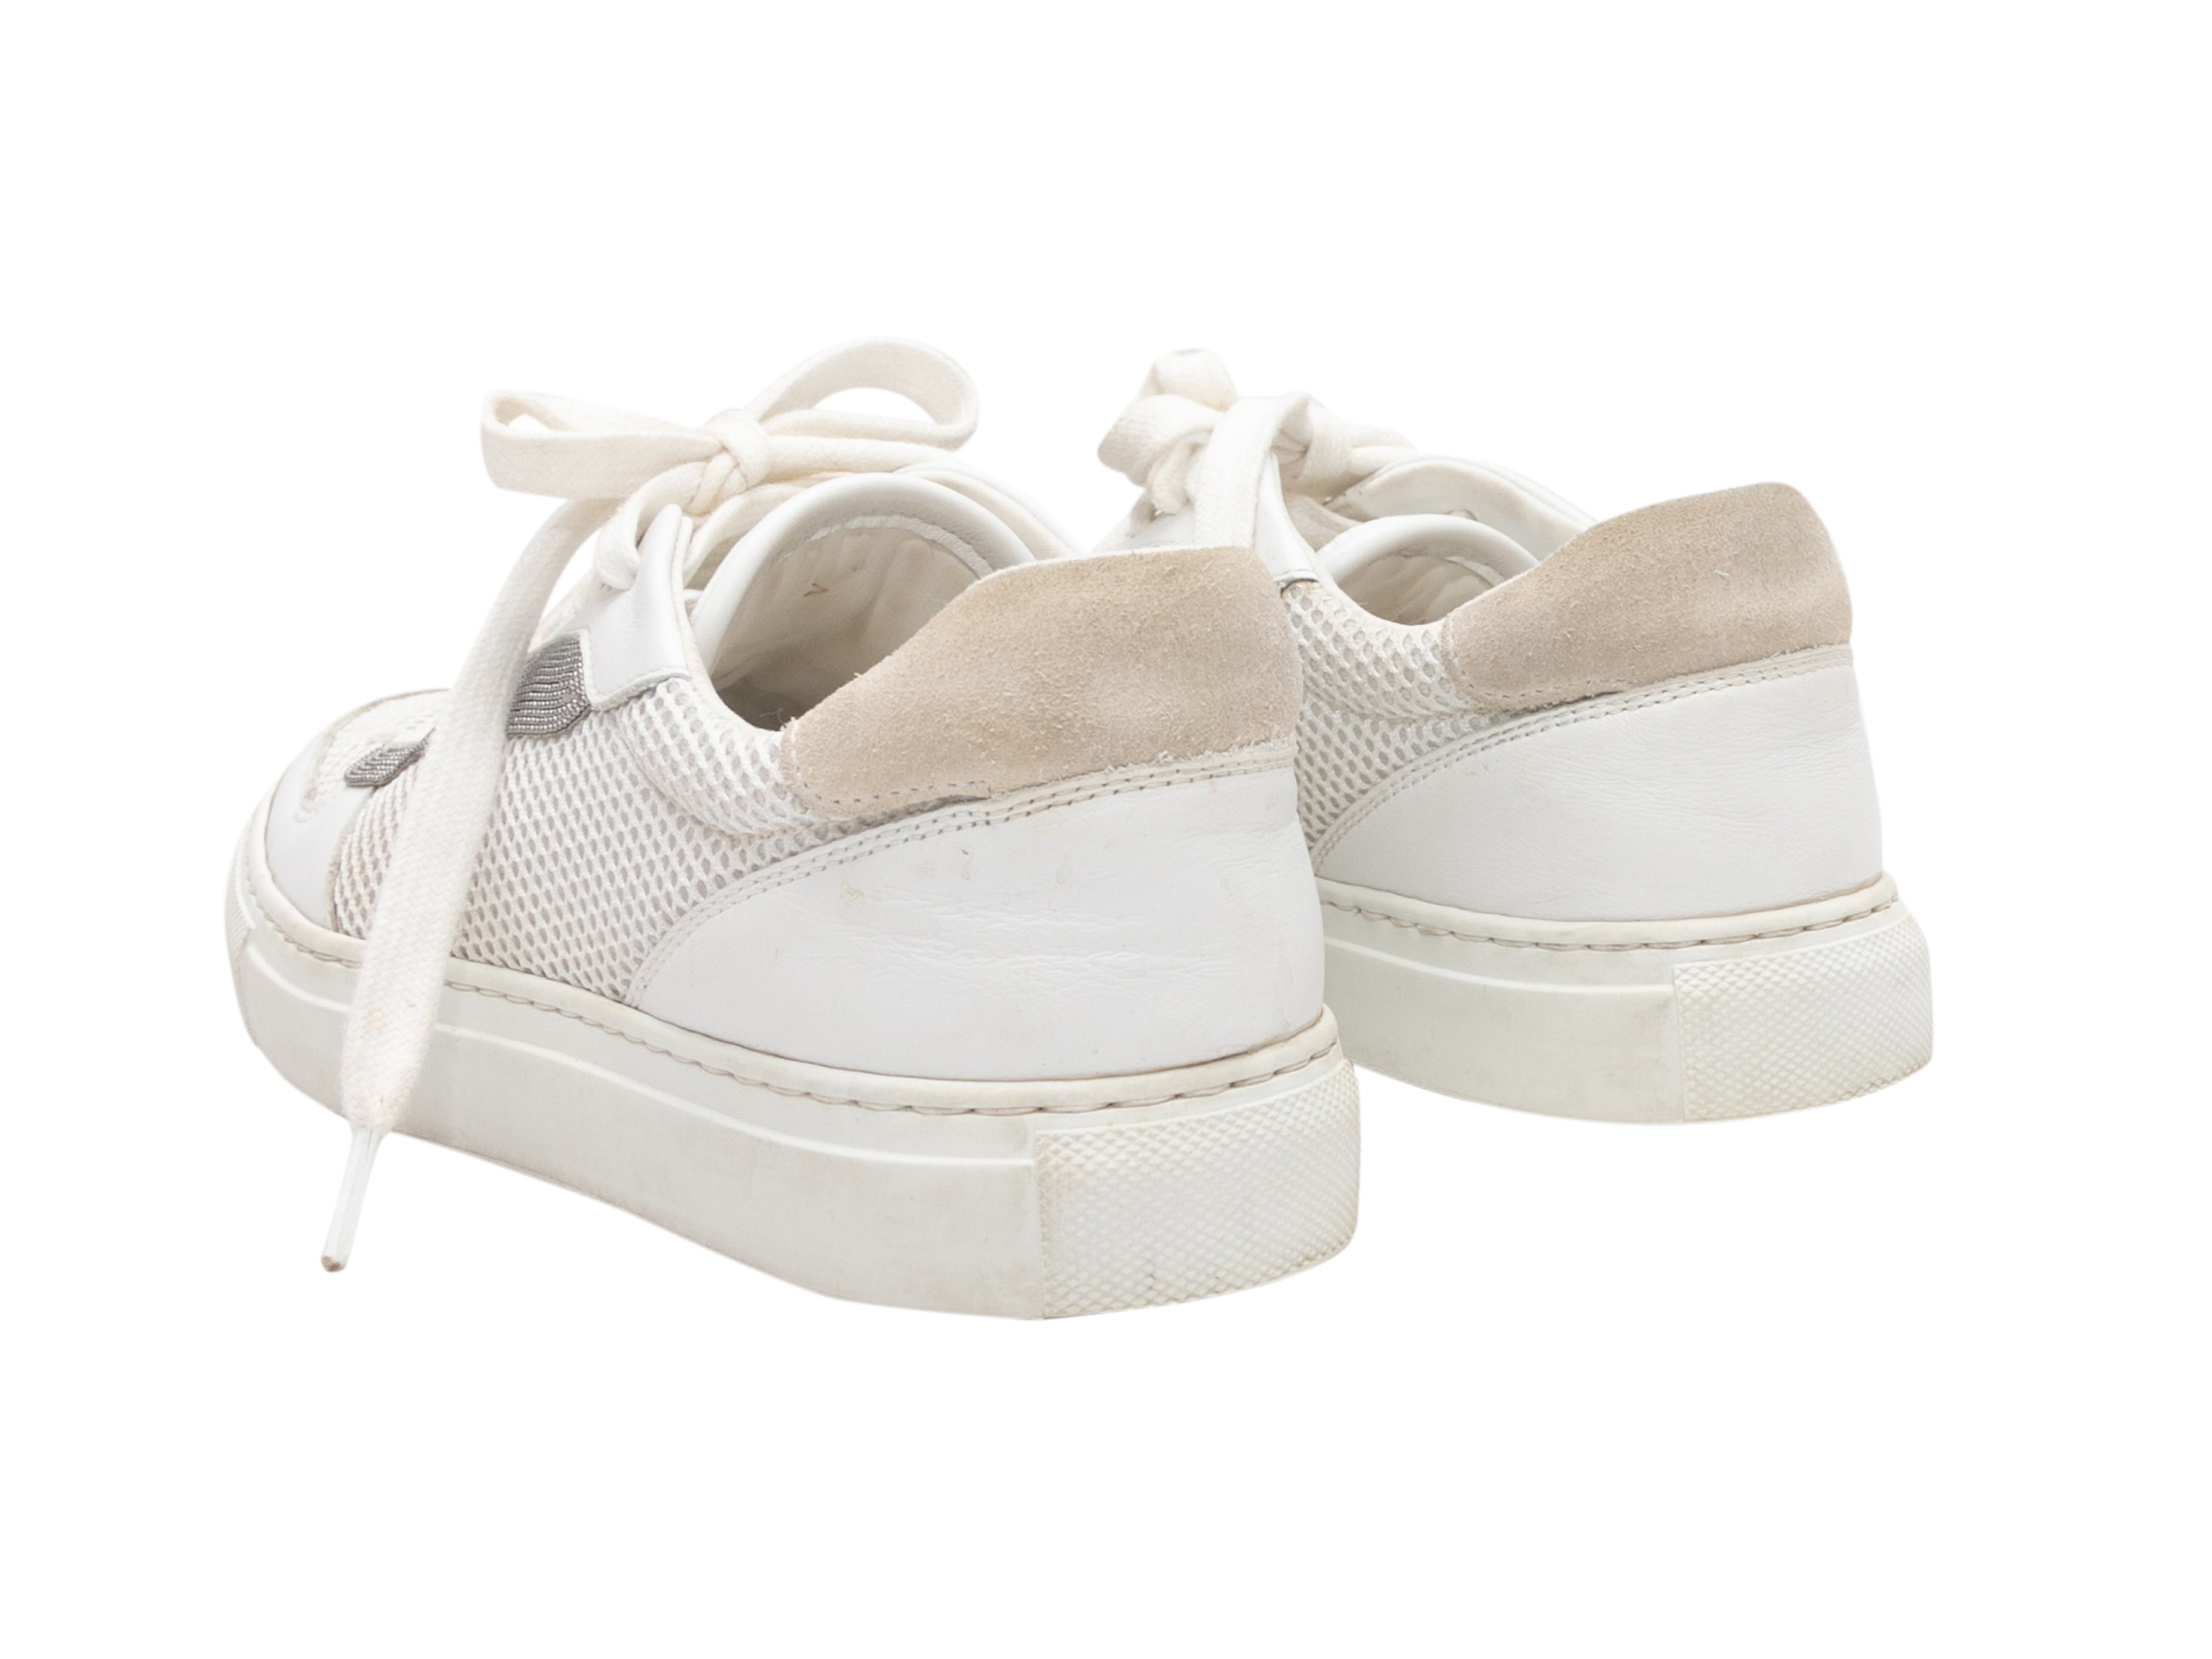 Monilli-Trimmed Sneakers Size 37